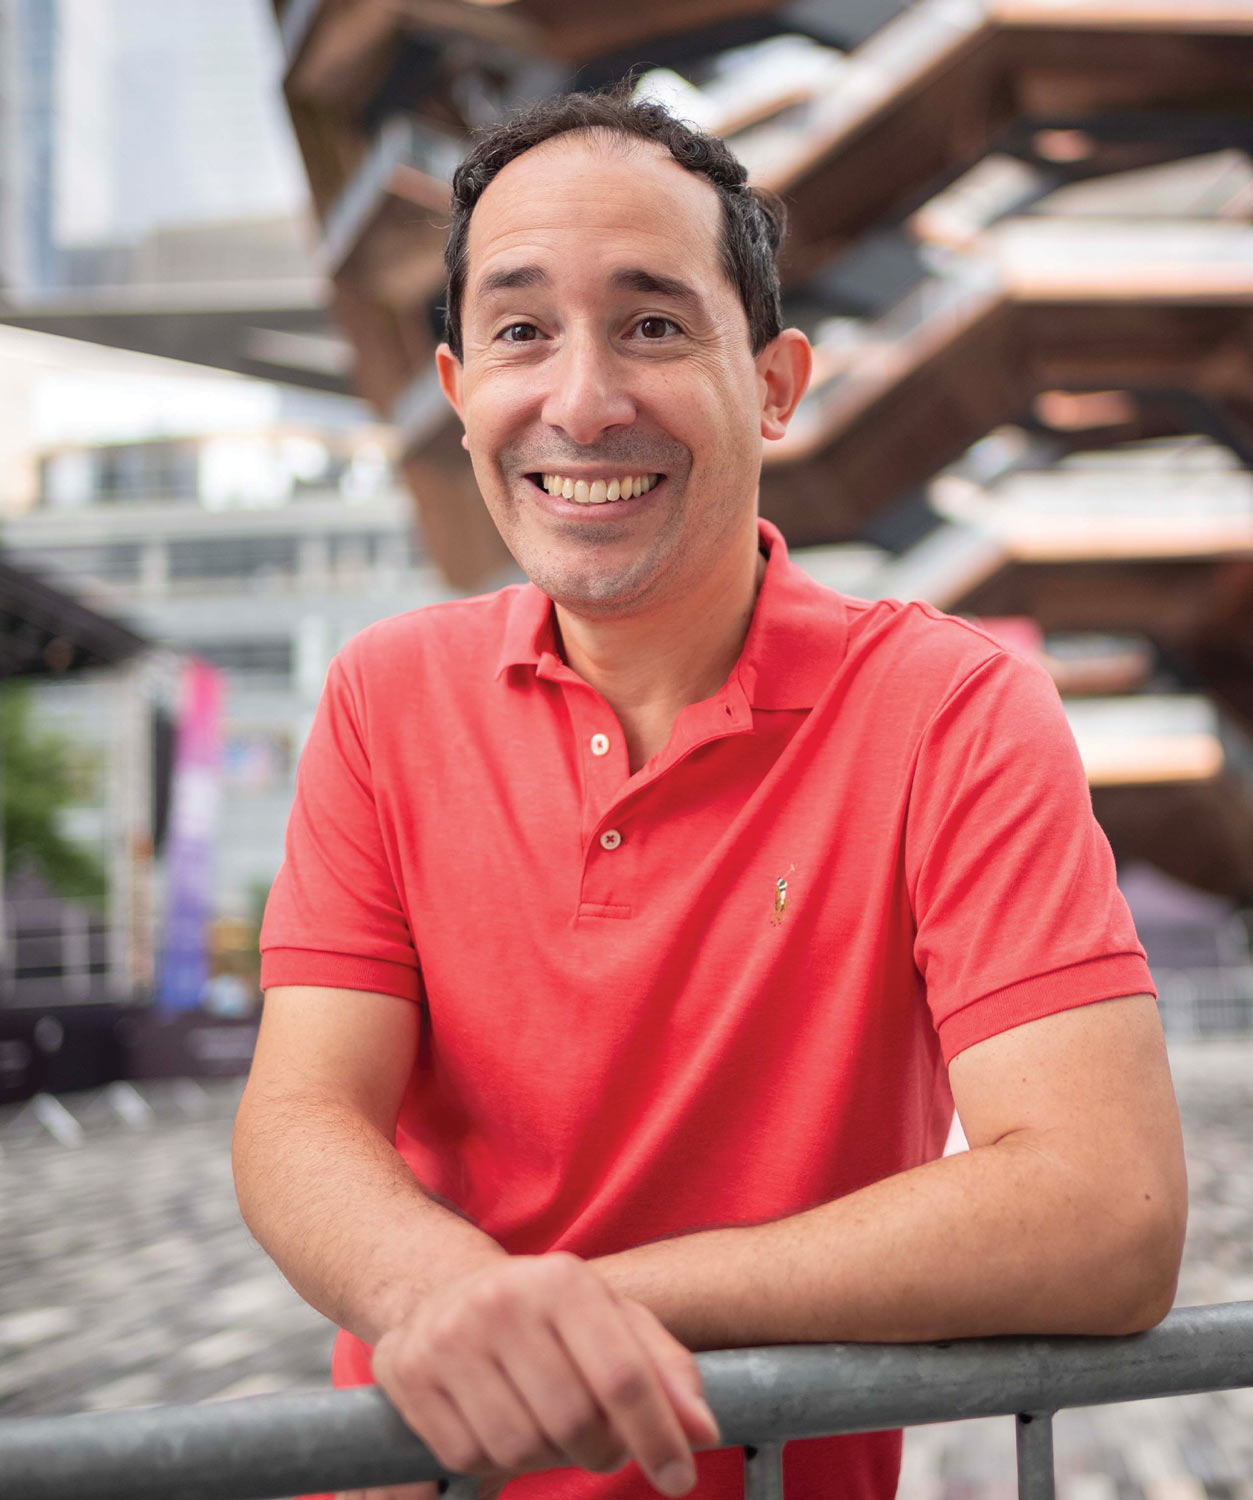 Piñeiro smiles at the camera, wearing a bright coral-colored polo shirt.